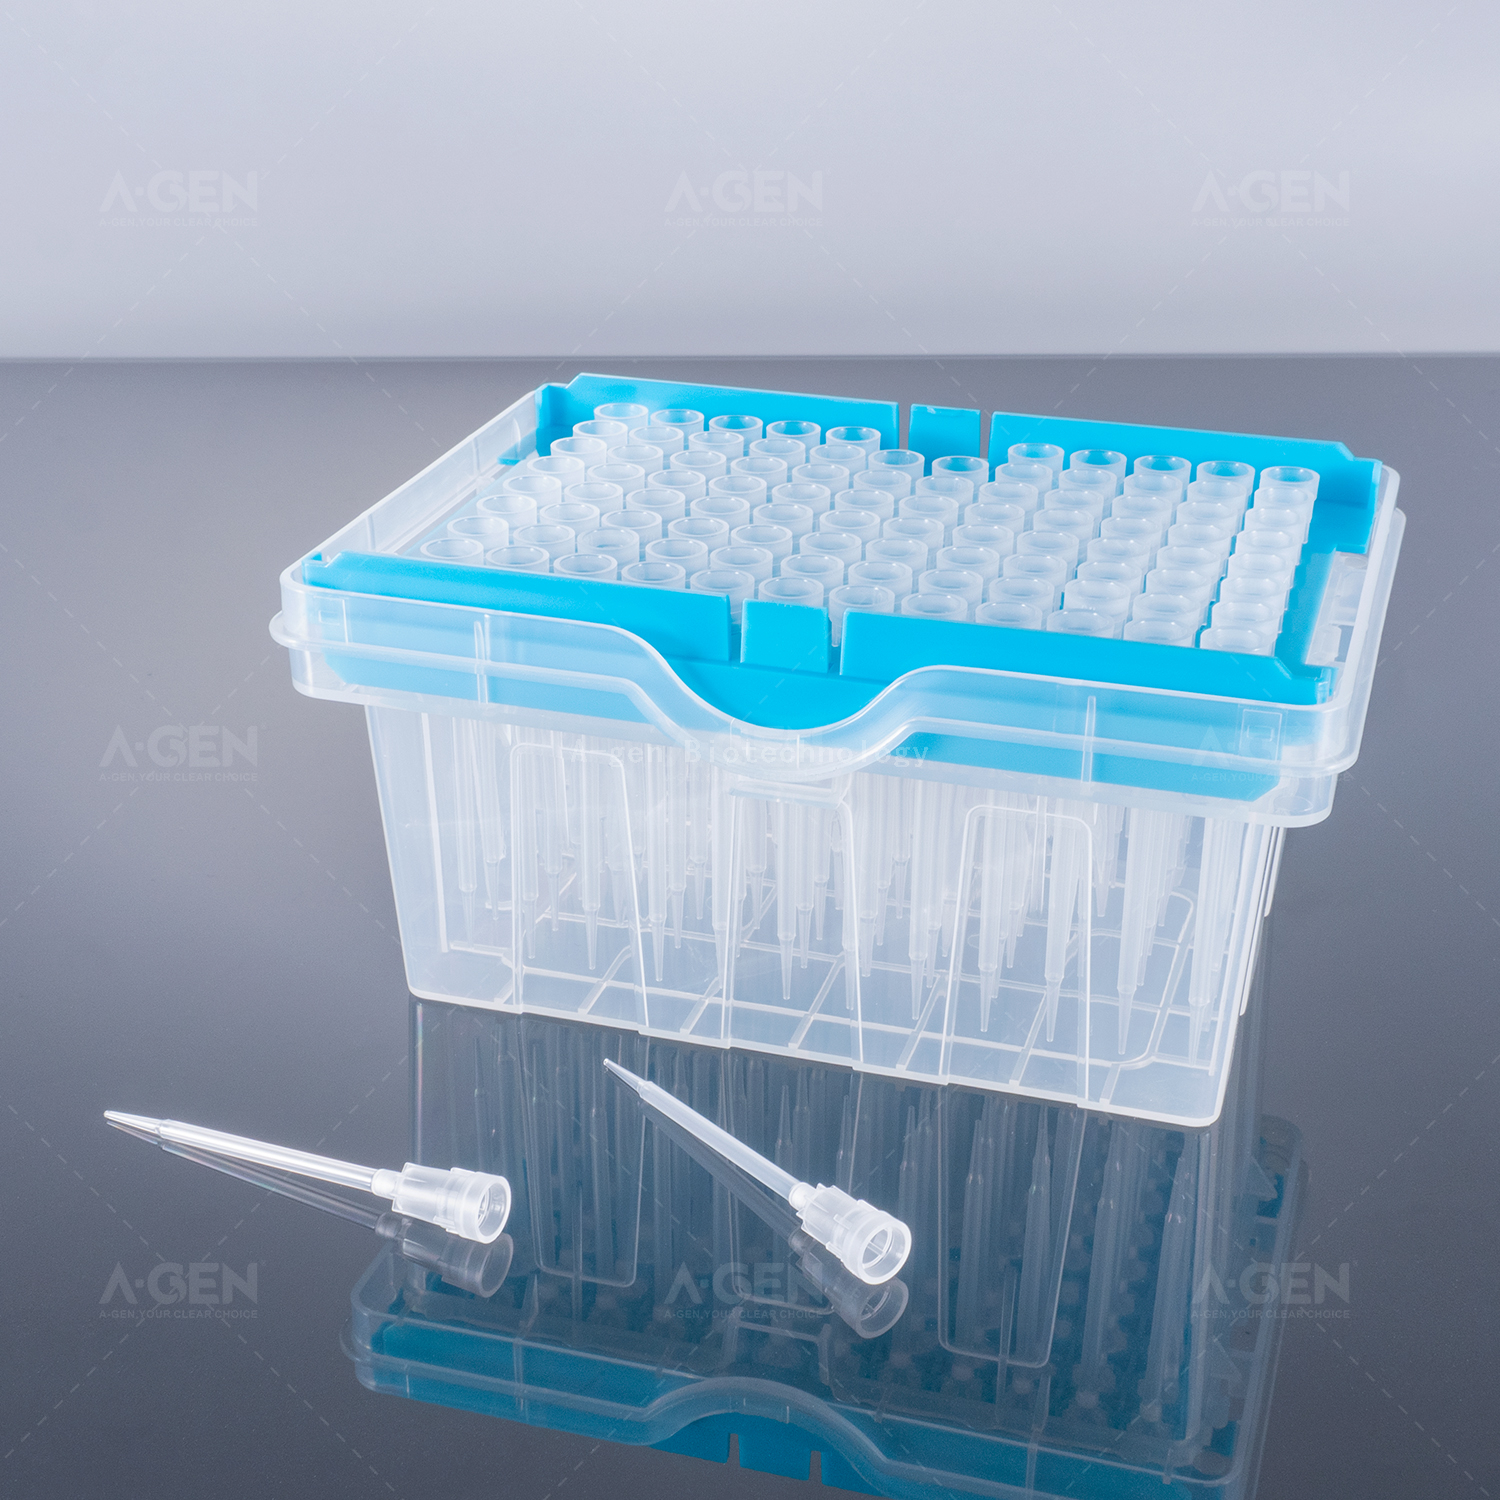 Tecan LiHa 50μL Transparent PP Pipette Tip (Racked,sterilized) for Liquid Transfer with Filter TTF-50-RS Nucleic Acid Extraction